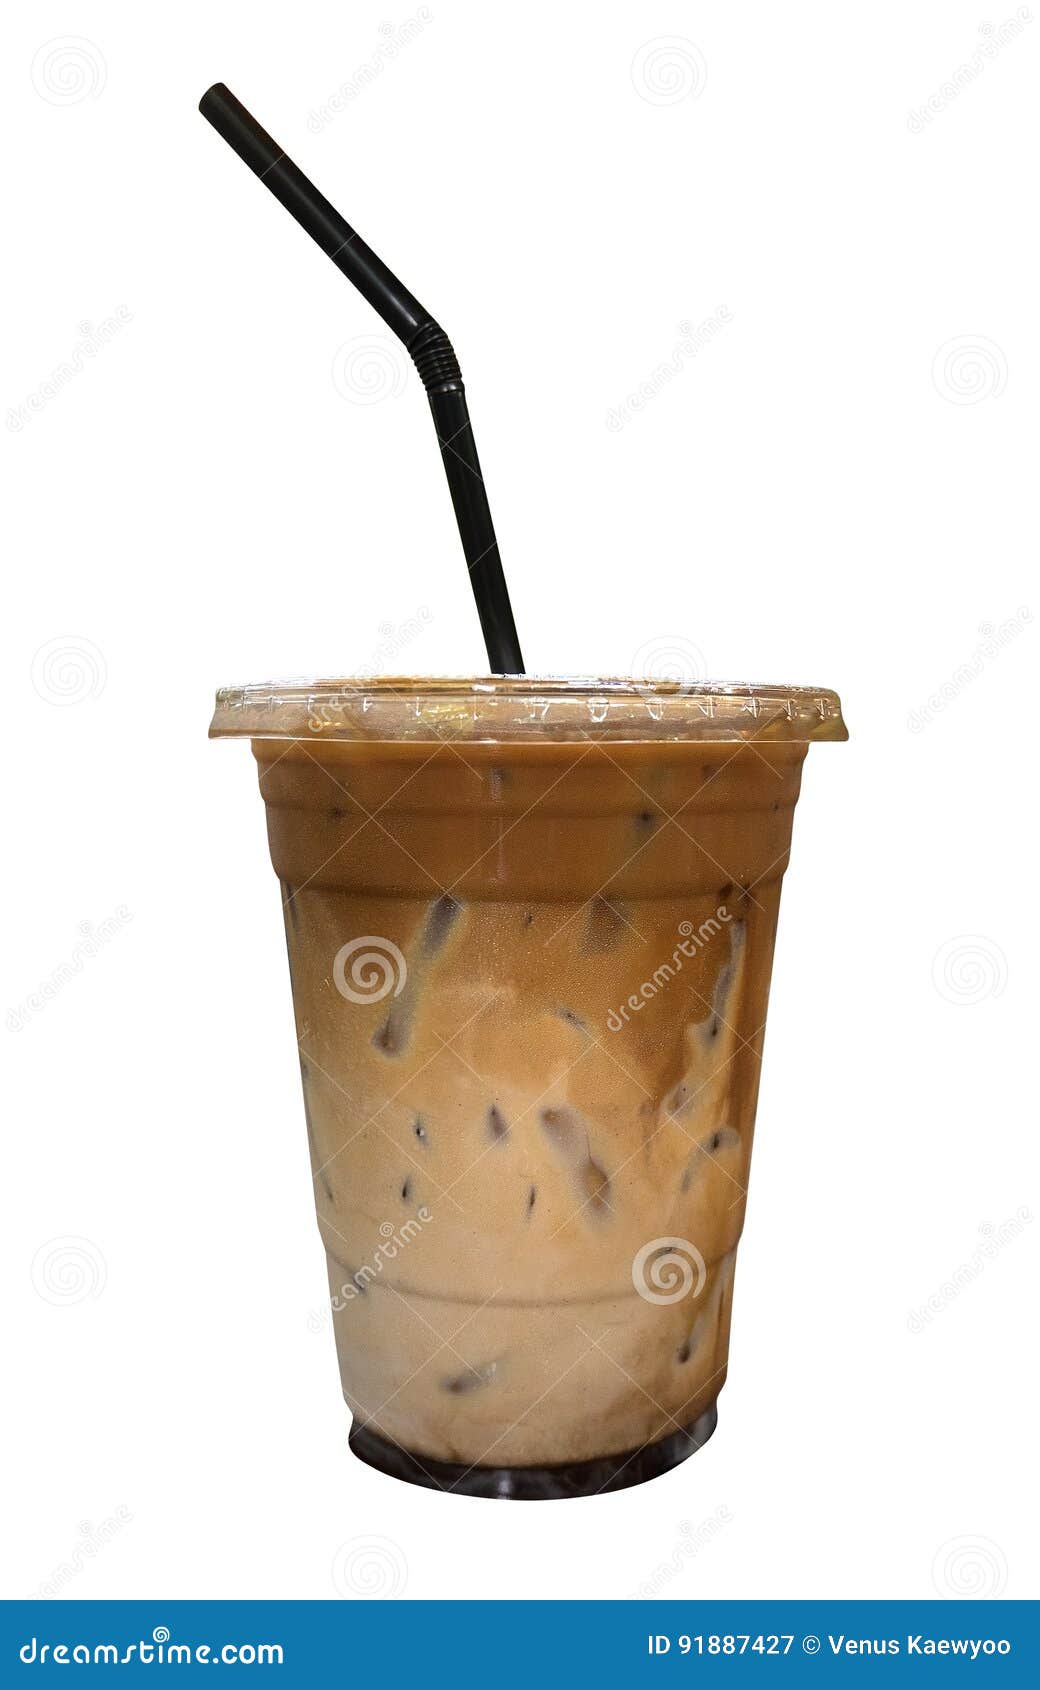 https://thumbs.dreamstime.com/z/mixed-iced-coffee-chocolate-plastic-cup-isolated-white-background-clipping-path-included-91887427.jpg